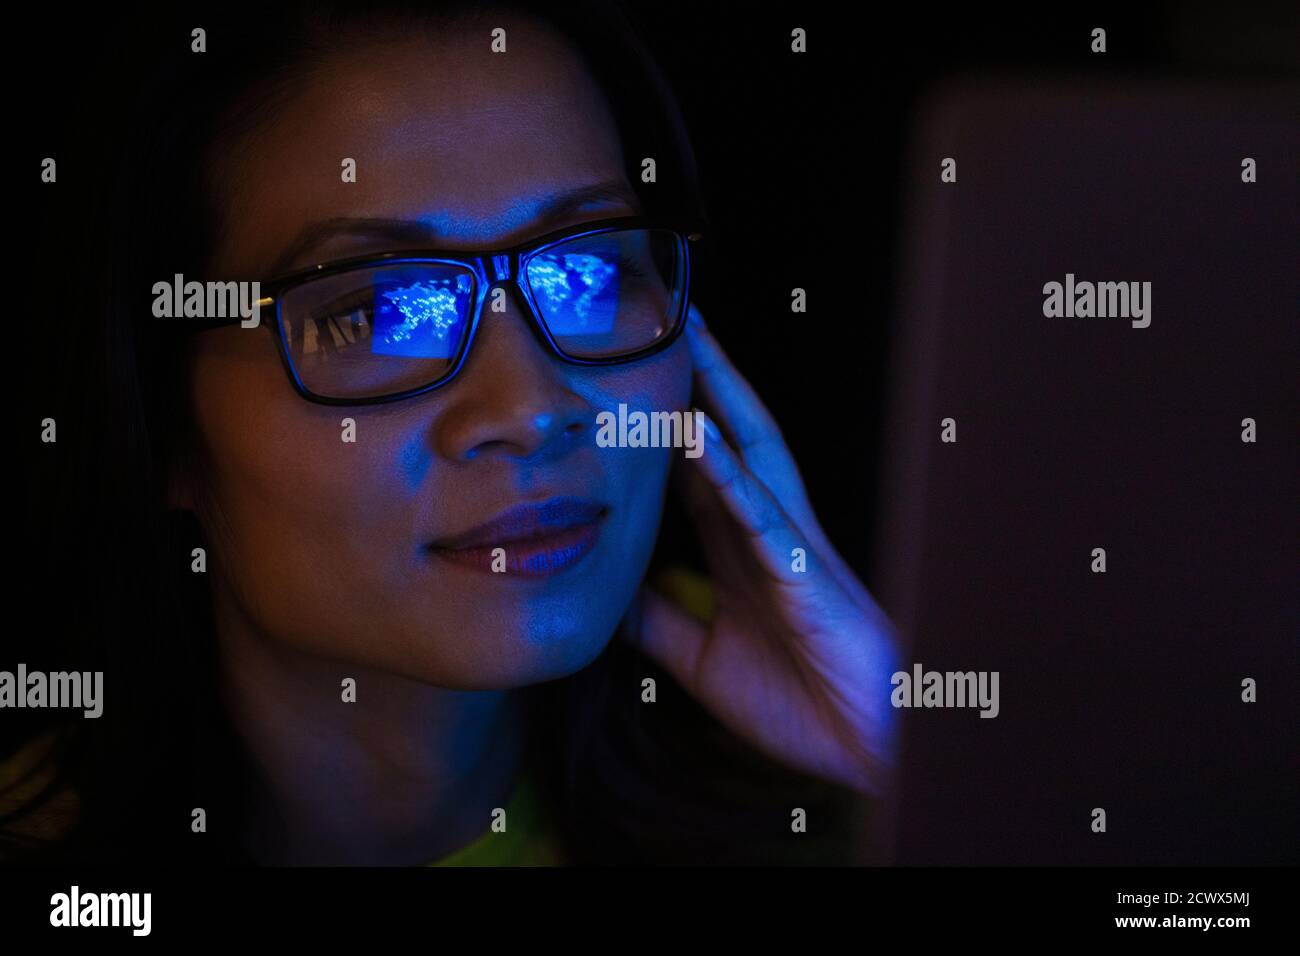 Close up laptop reflection in eyeglasses of businesswoman working late Stock Photo